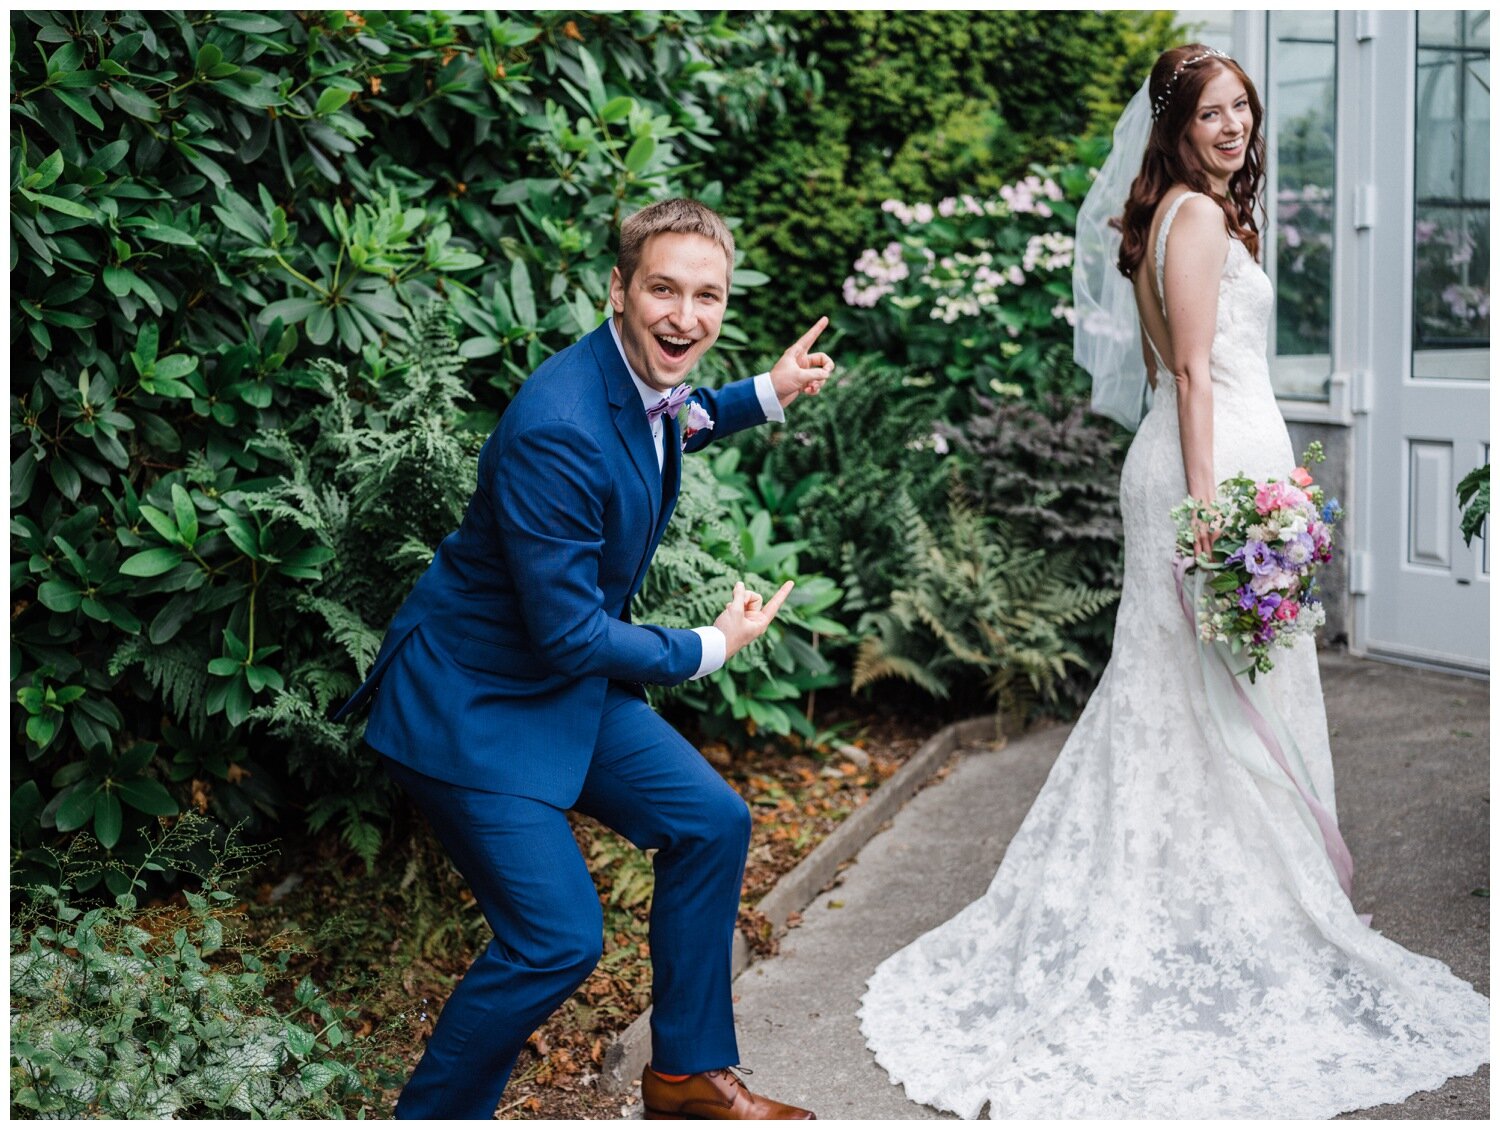 Bride and Groom Portraits at the Volunteer Park Conservatory